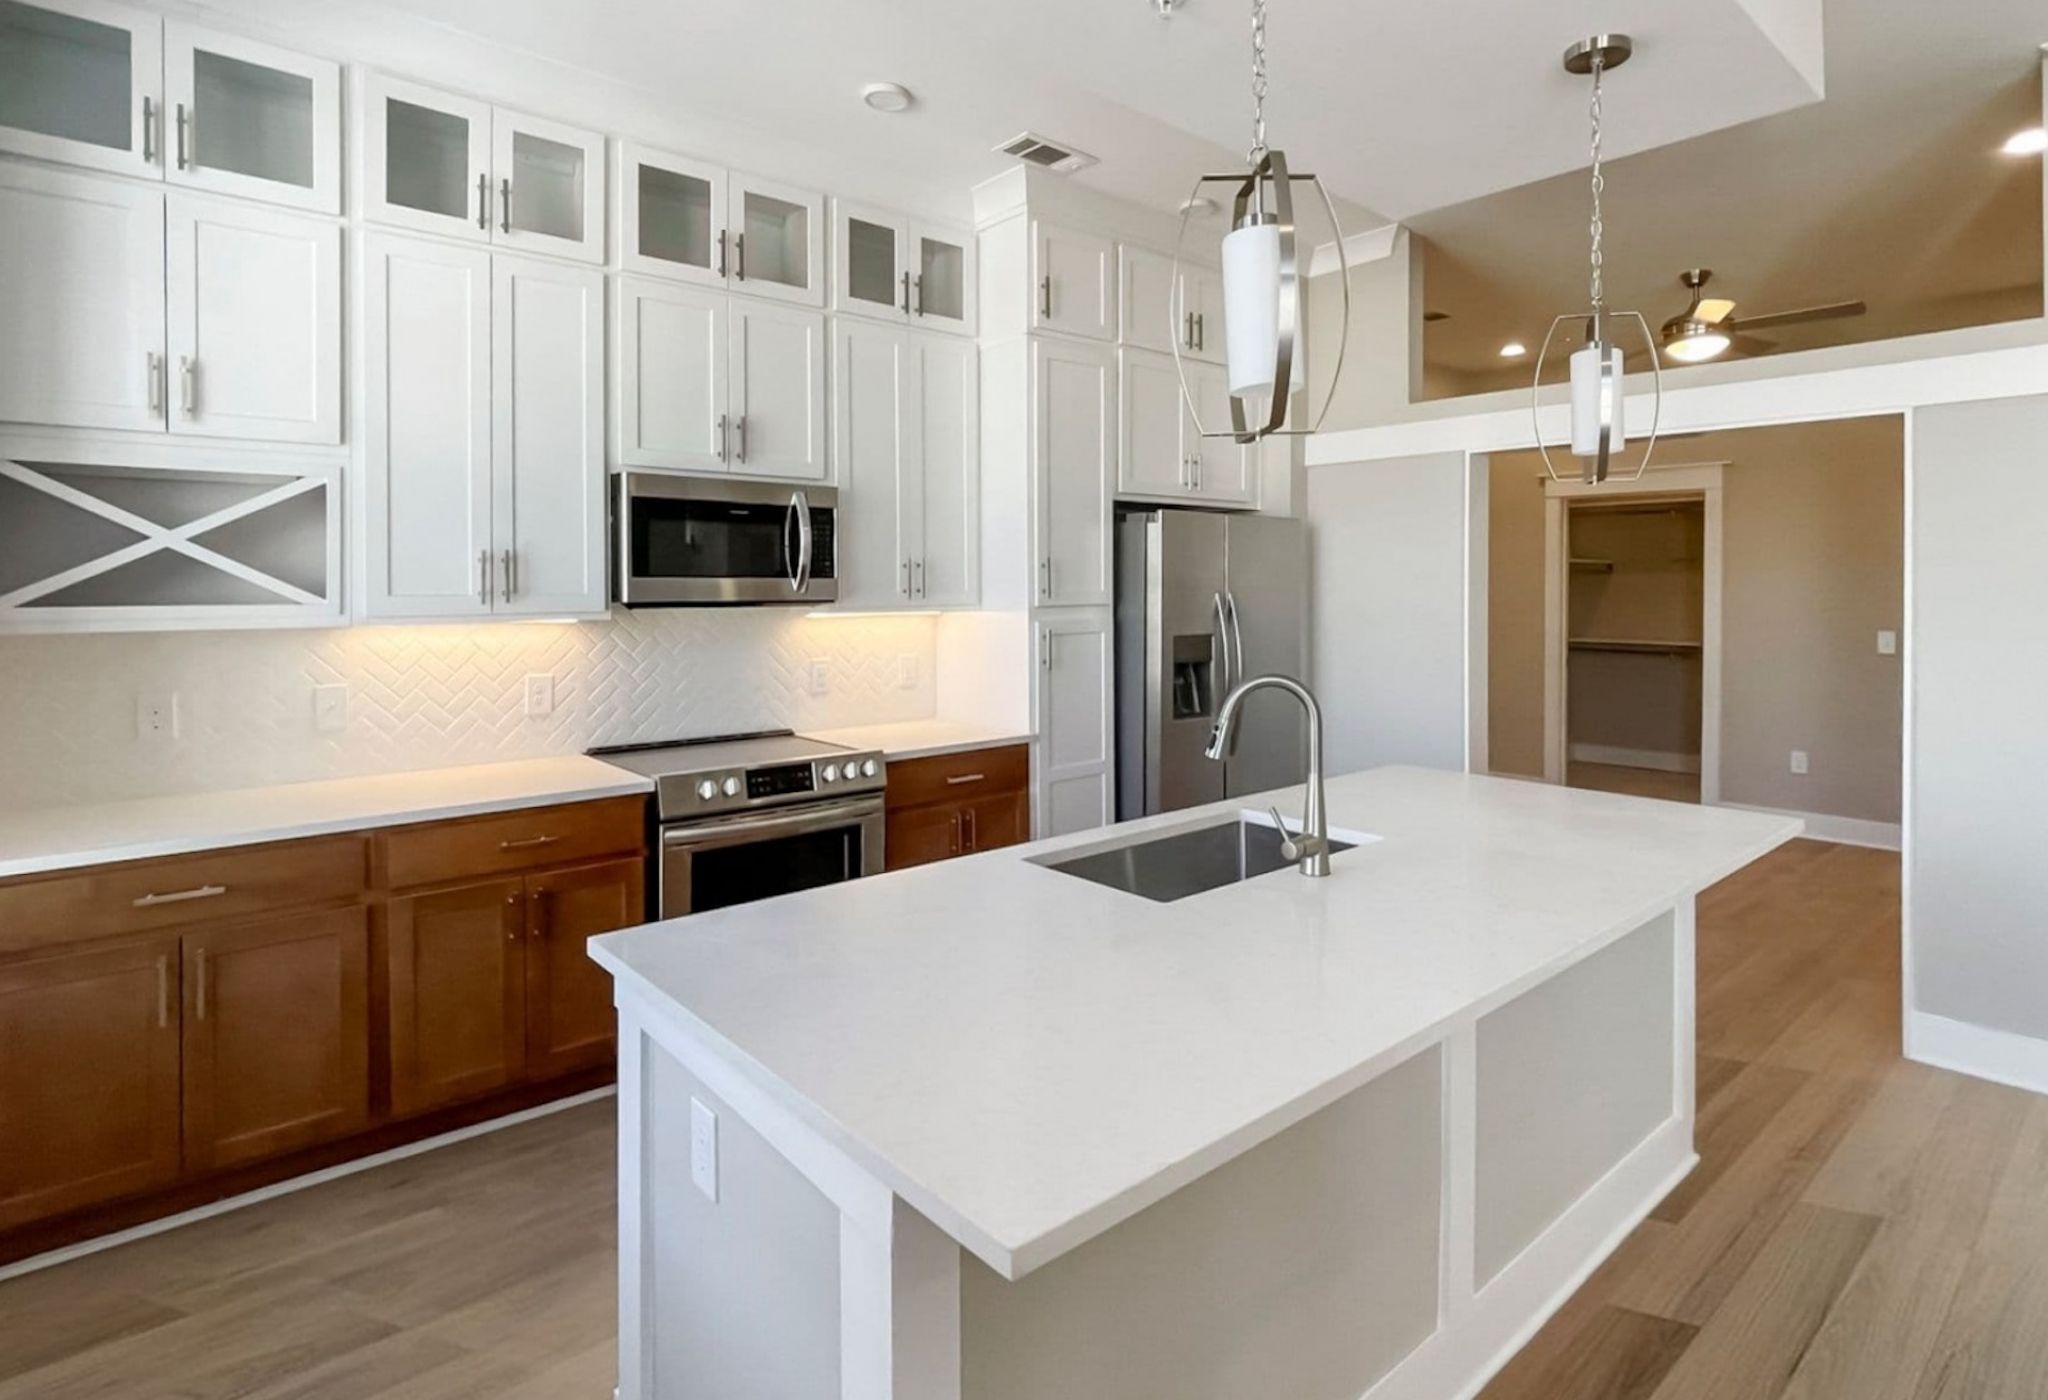 Luxury apartment kitchen with two-tone cabinetry, built-in wine storage, stainless steel appliances, and quartz countertops